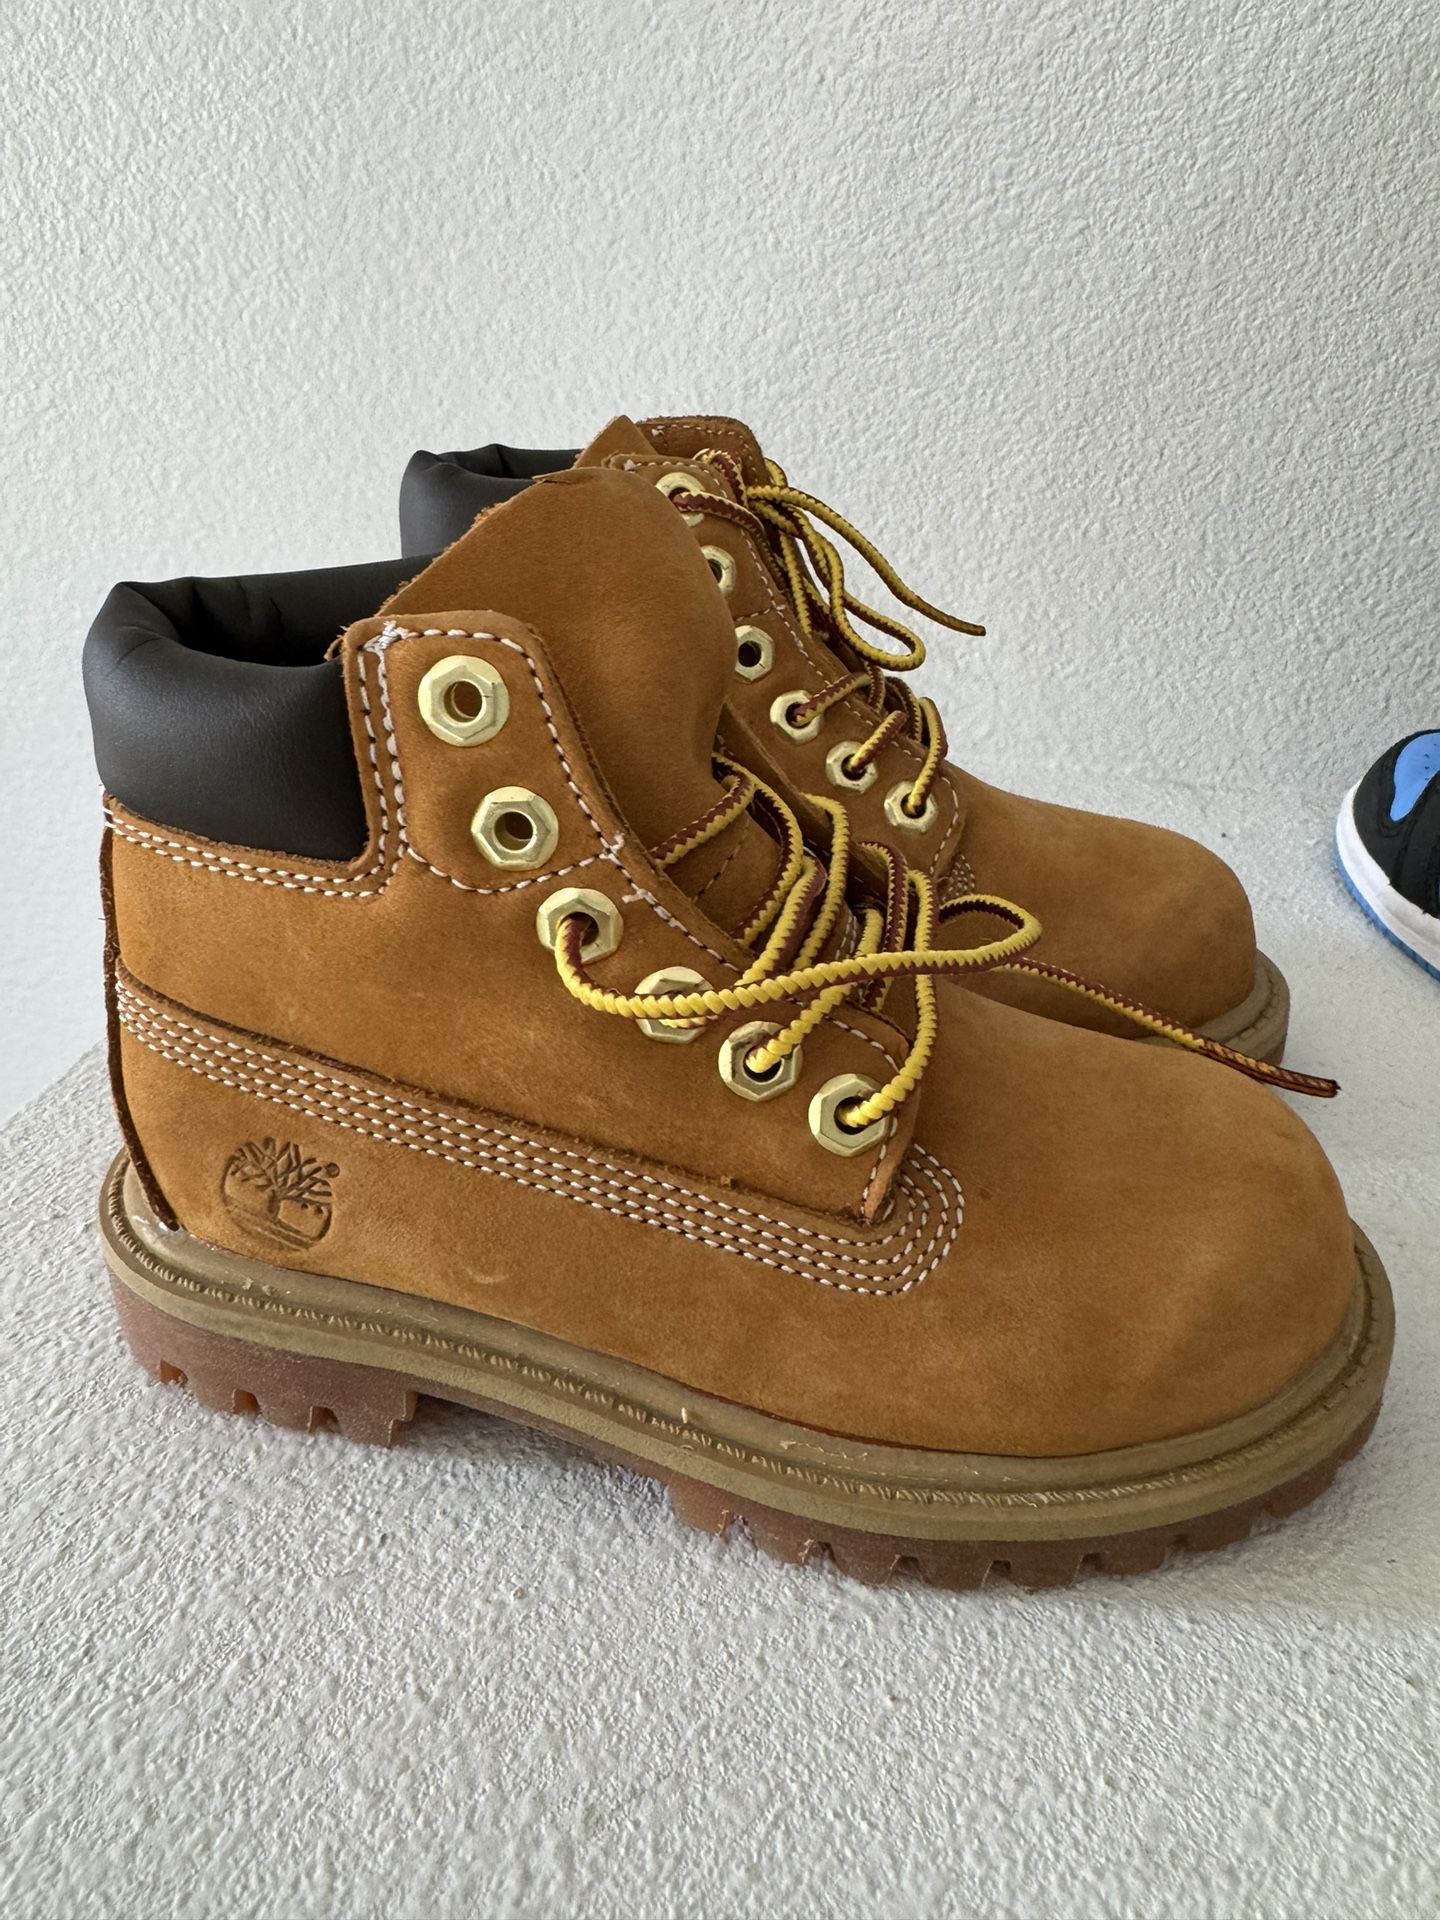 timberland shoes toddler size 9 brand new 